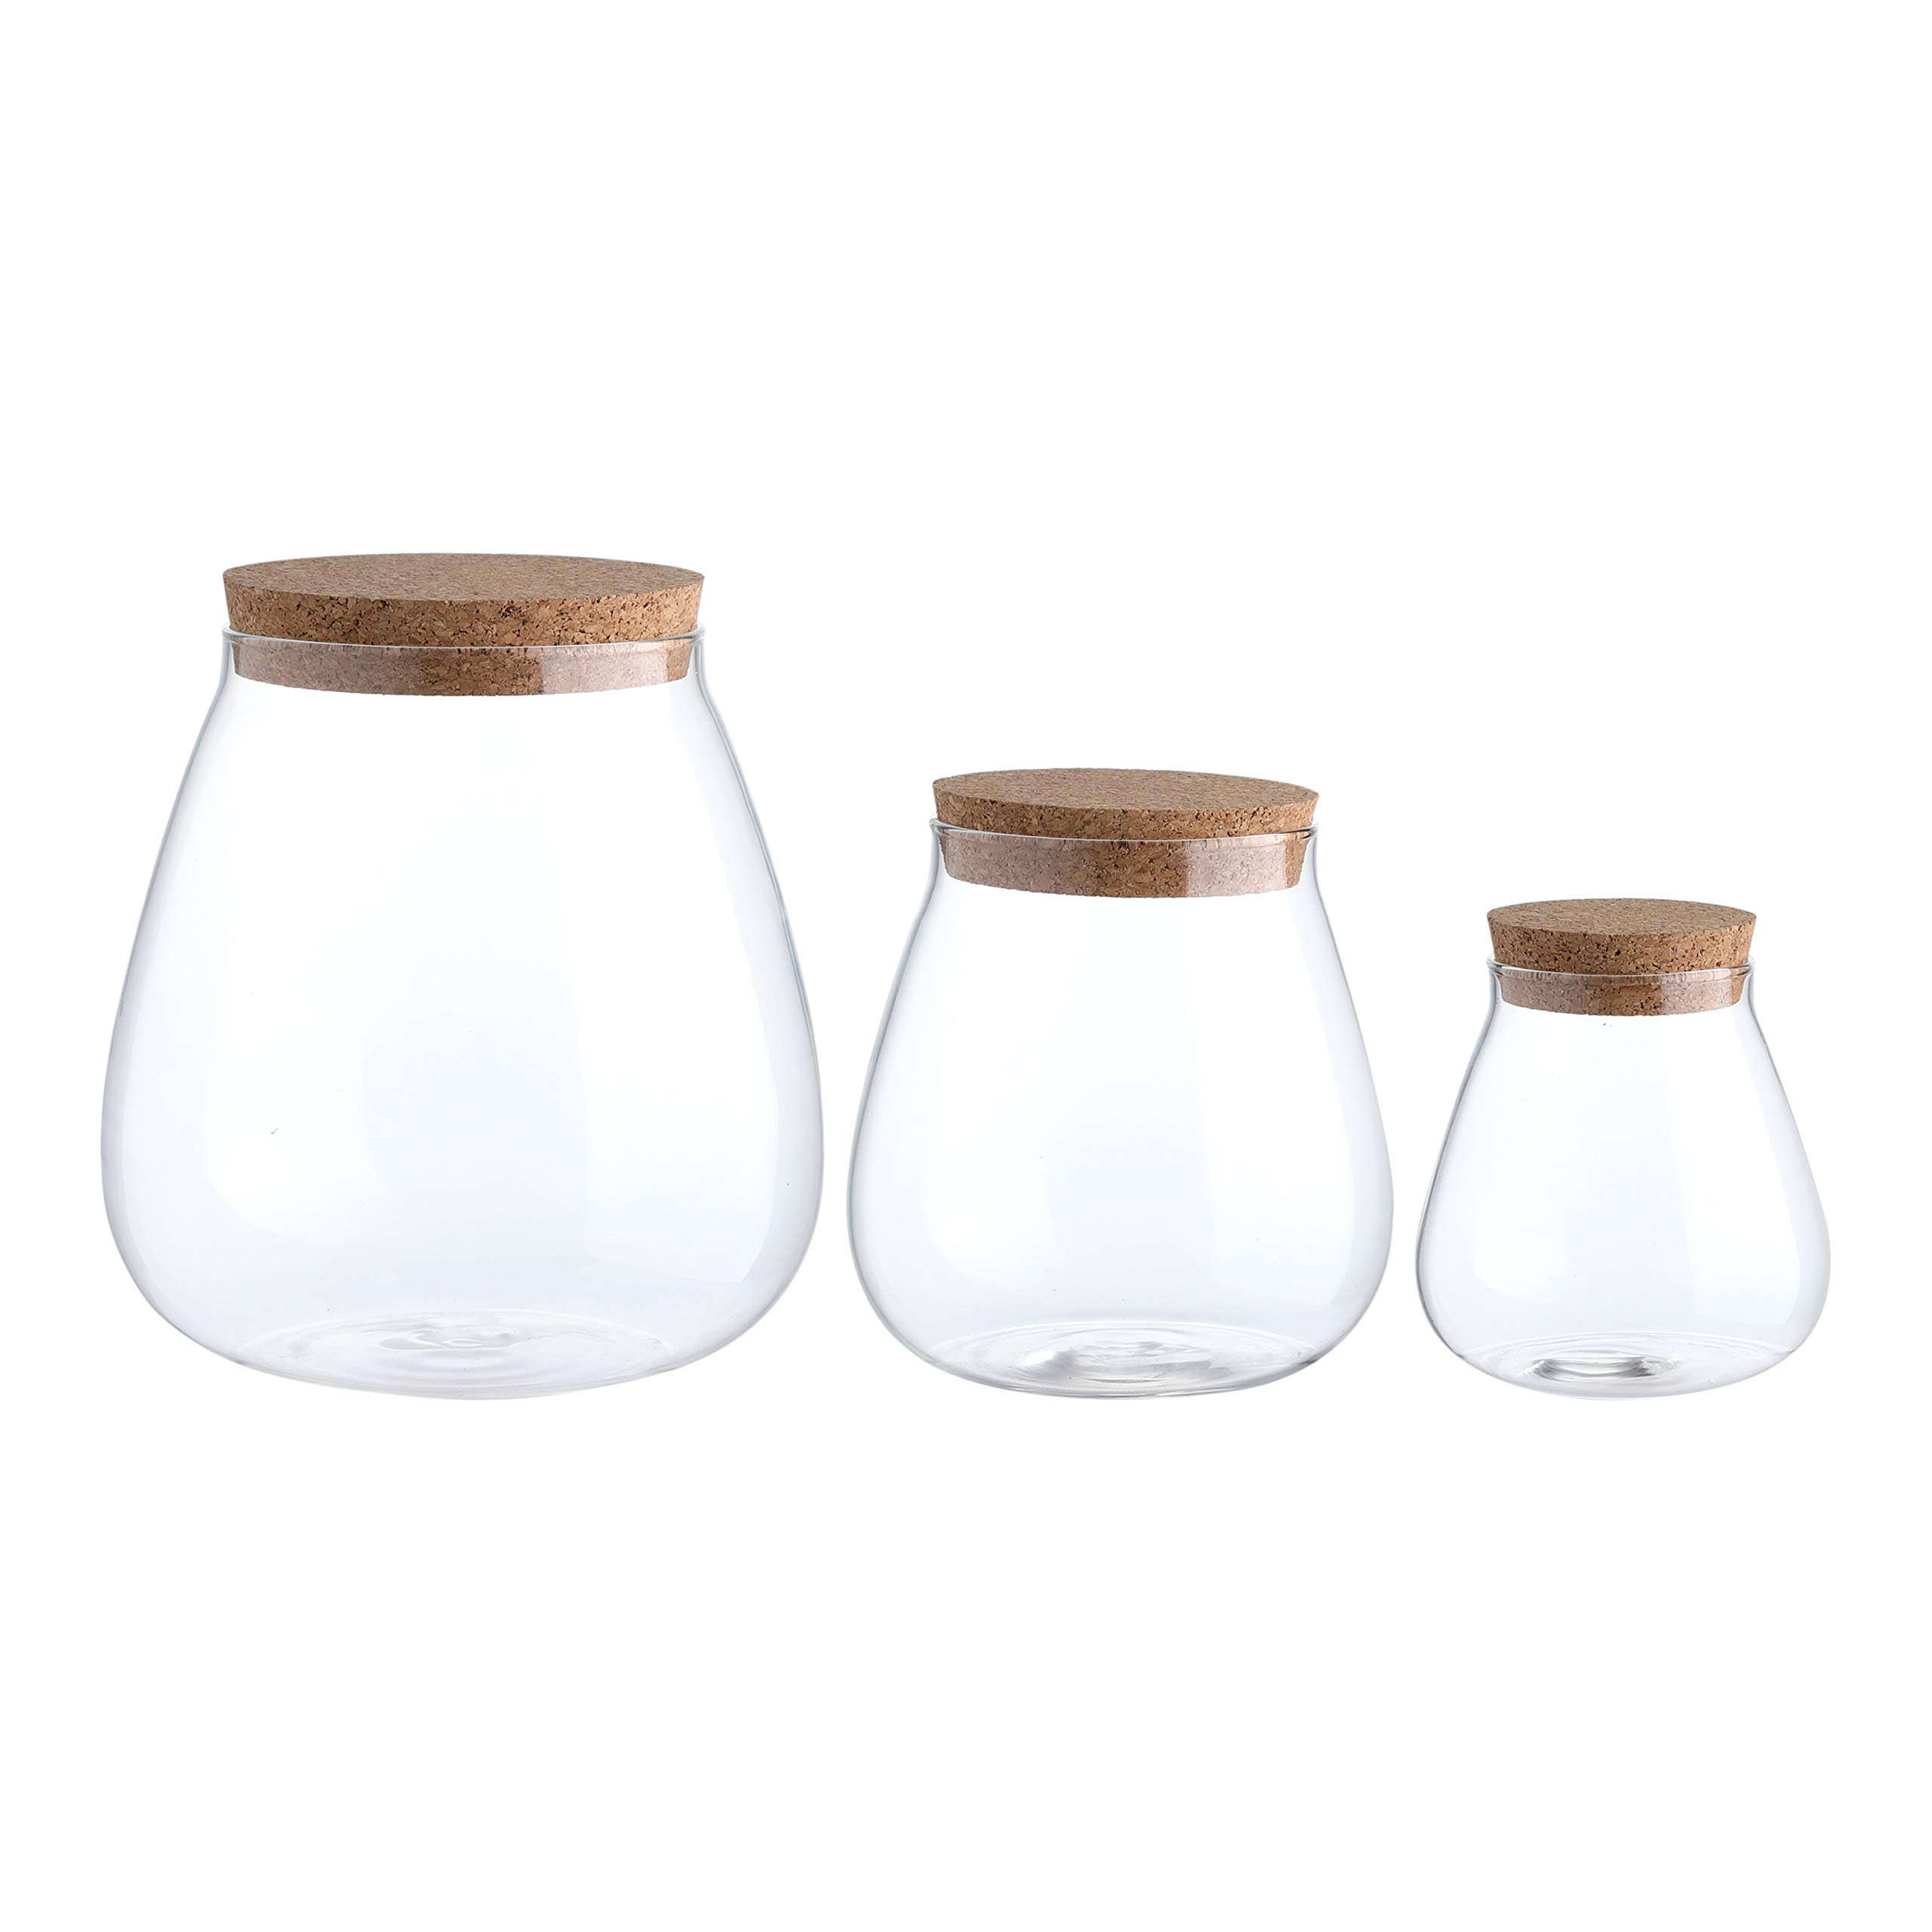 Rebrilliant Ryder Glass Food Storage Containers - 4 Three